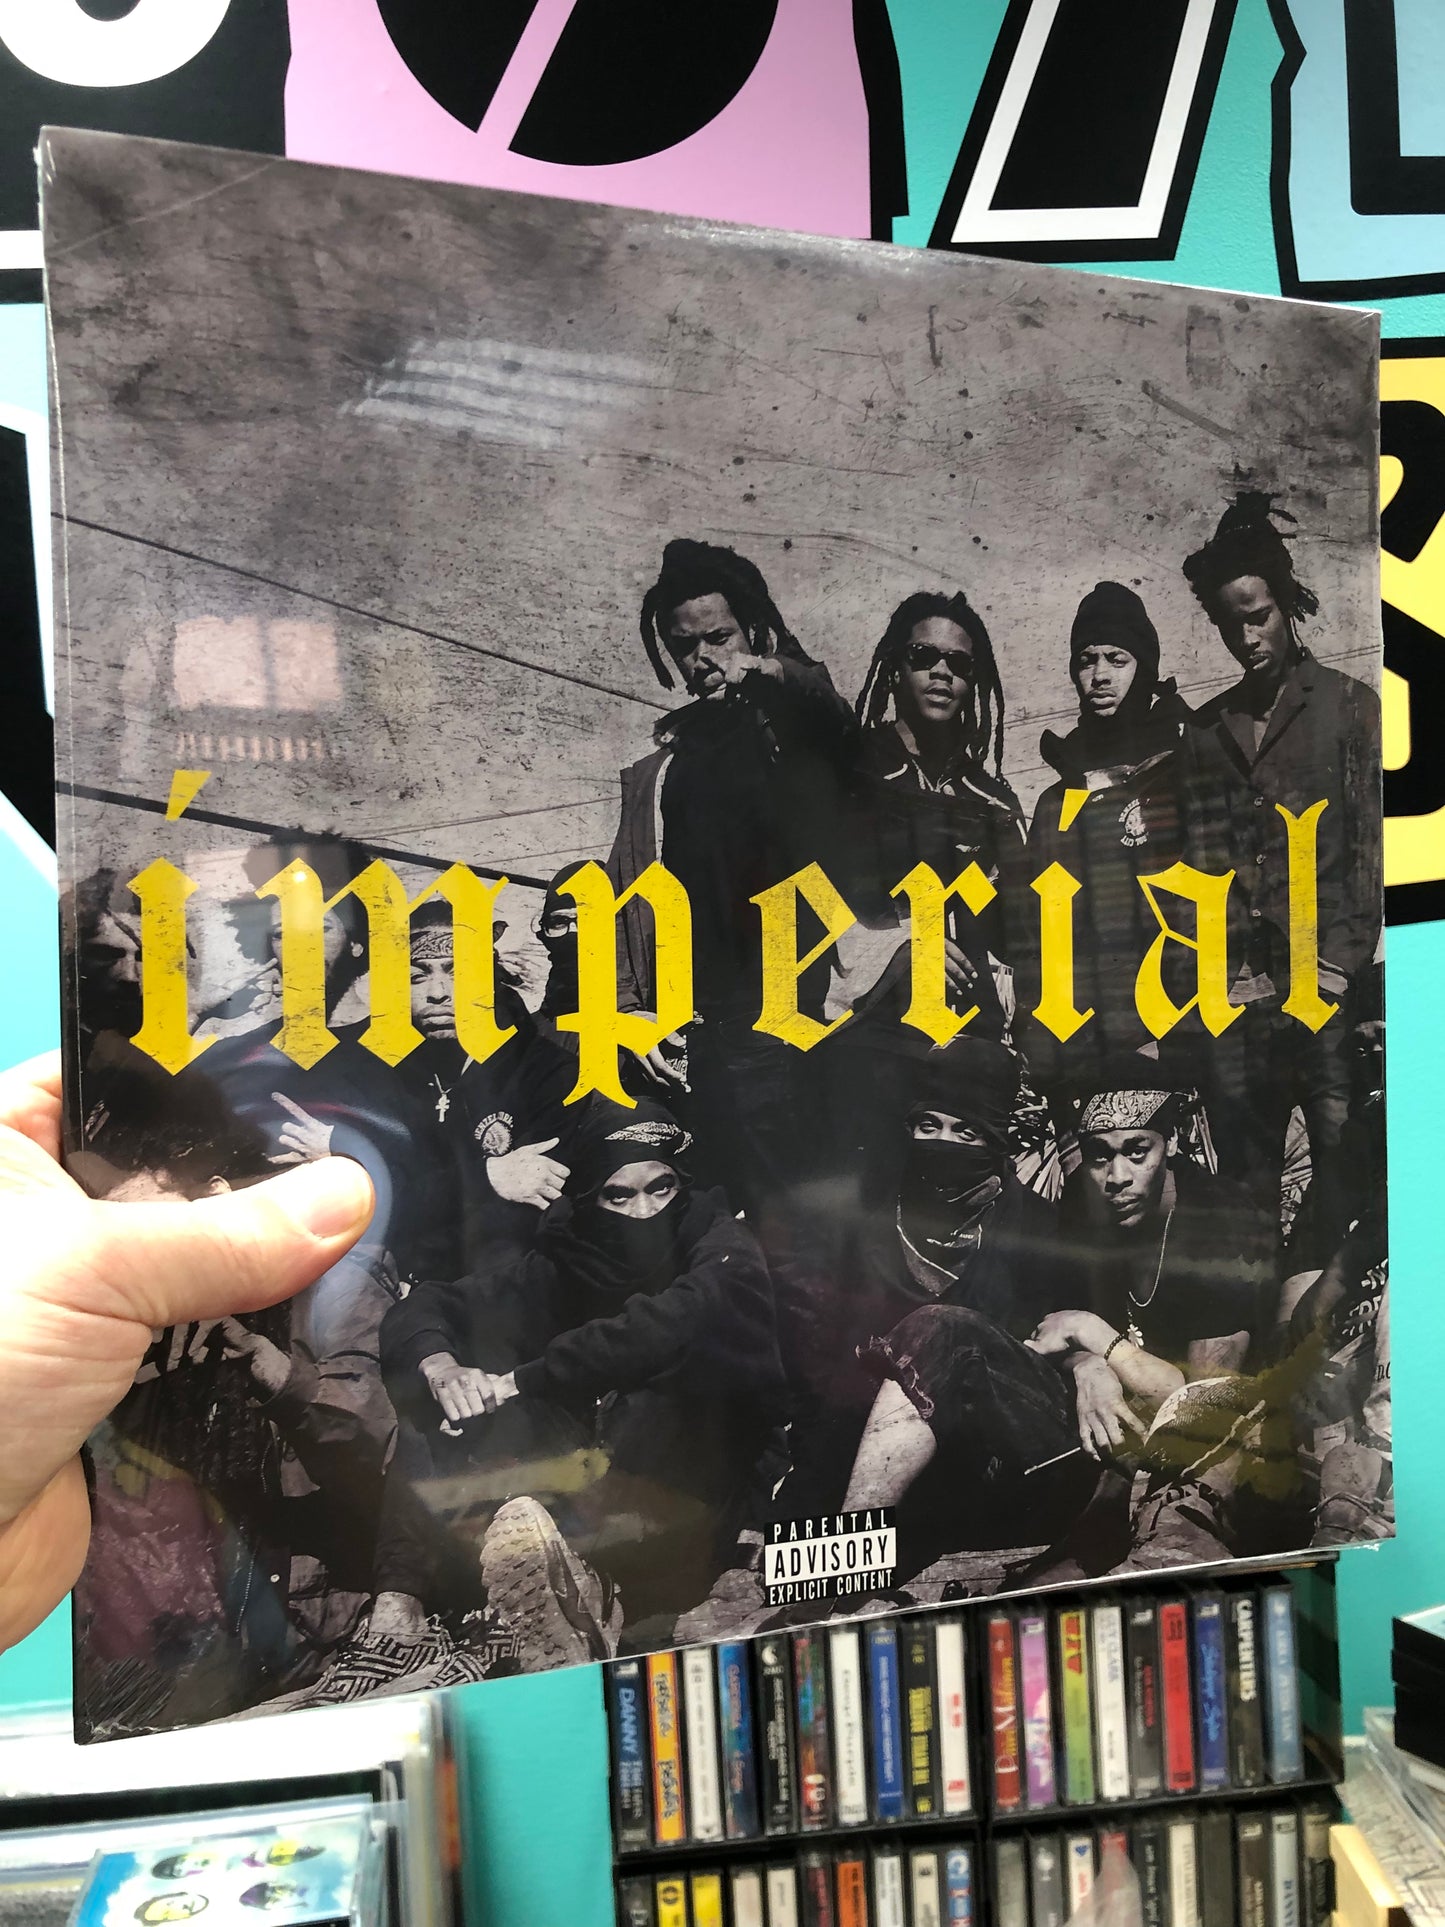 Denzel Curry: Imperial, reissue, Europe 2017